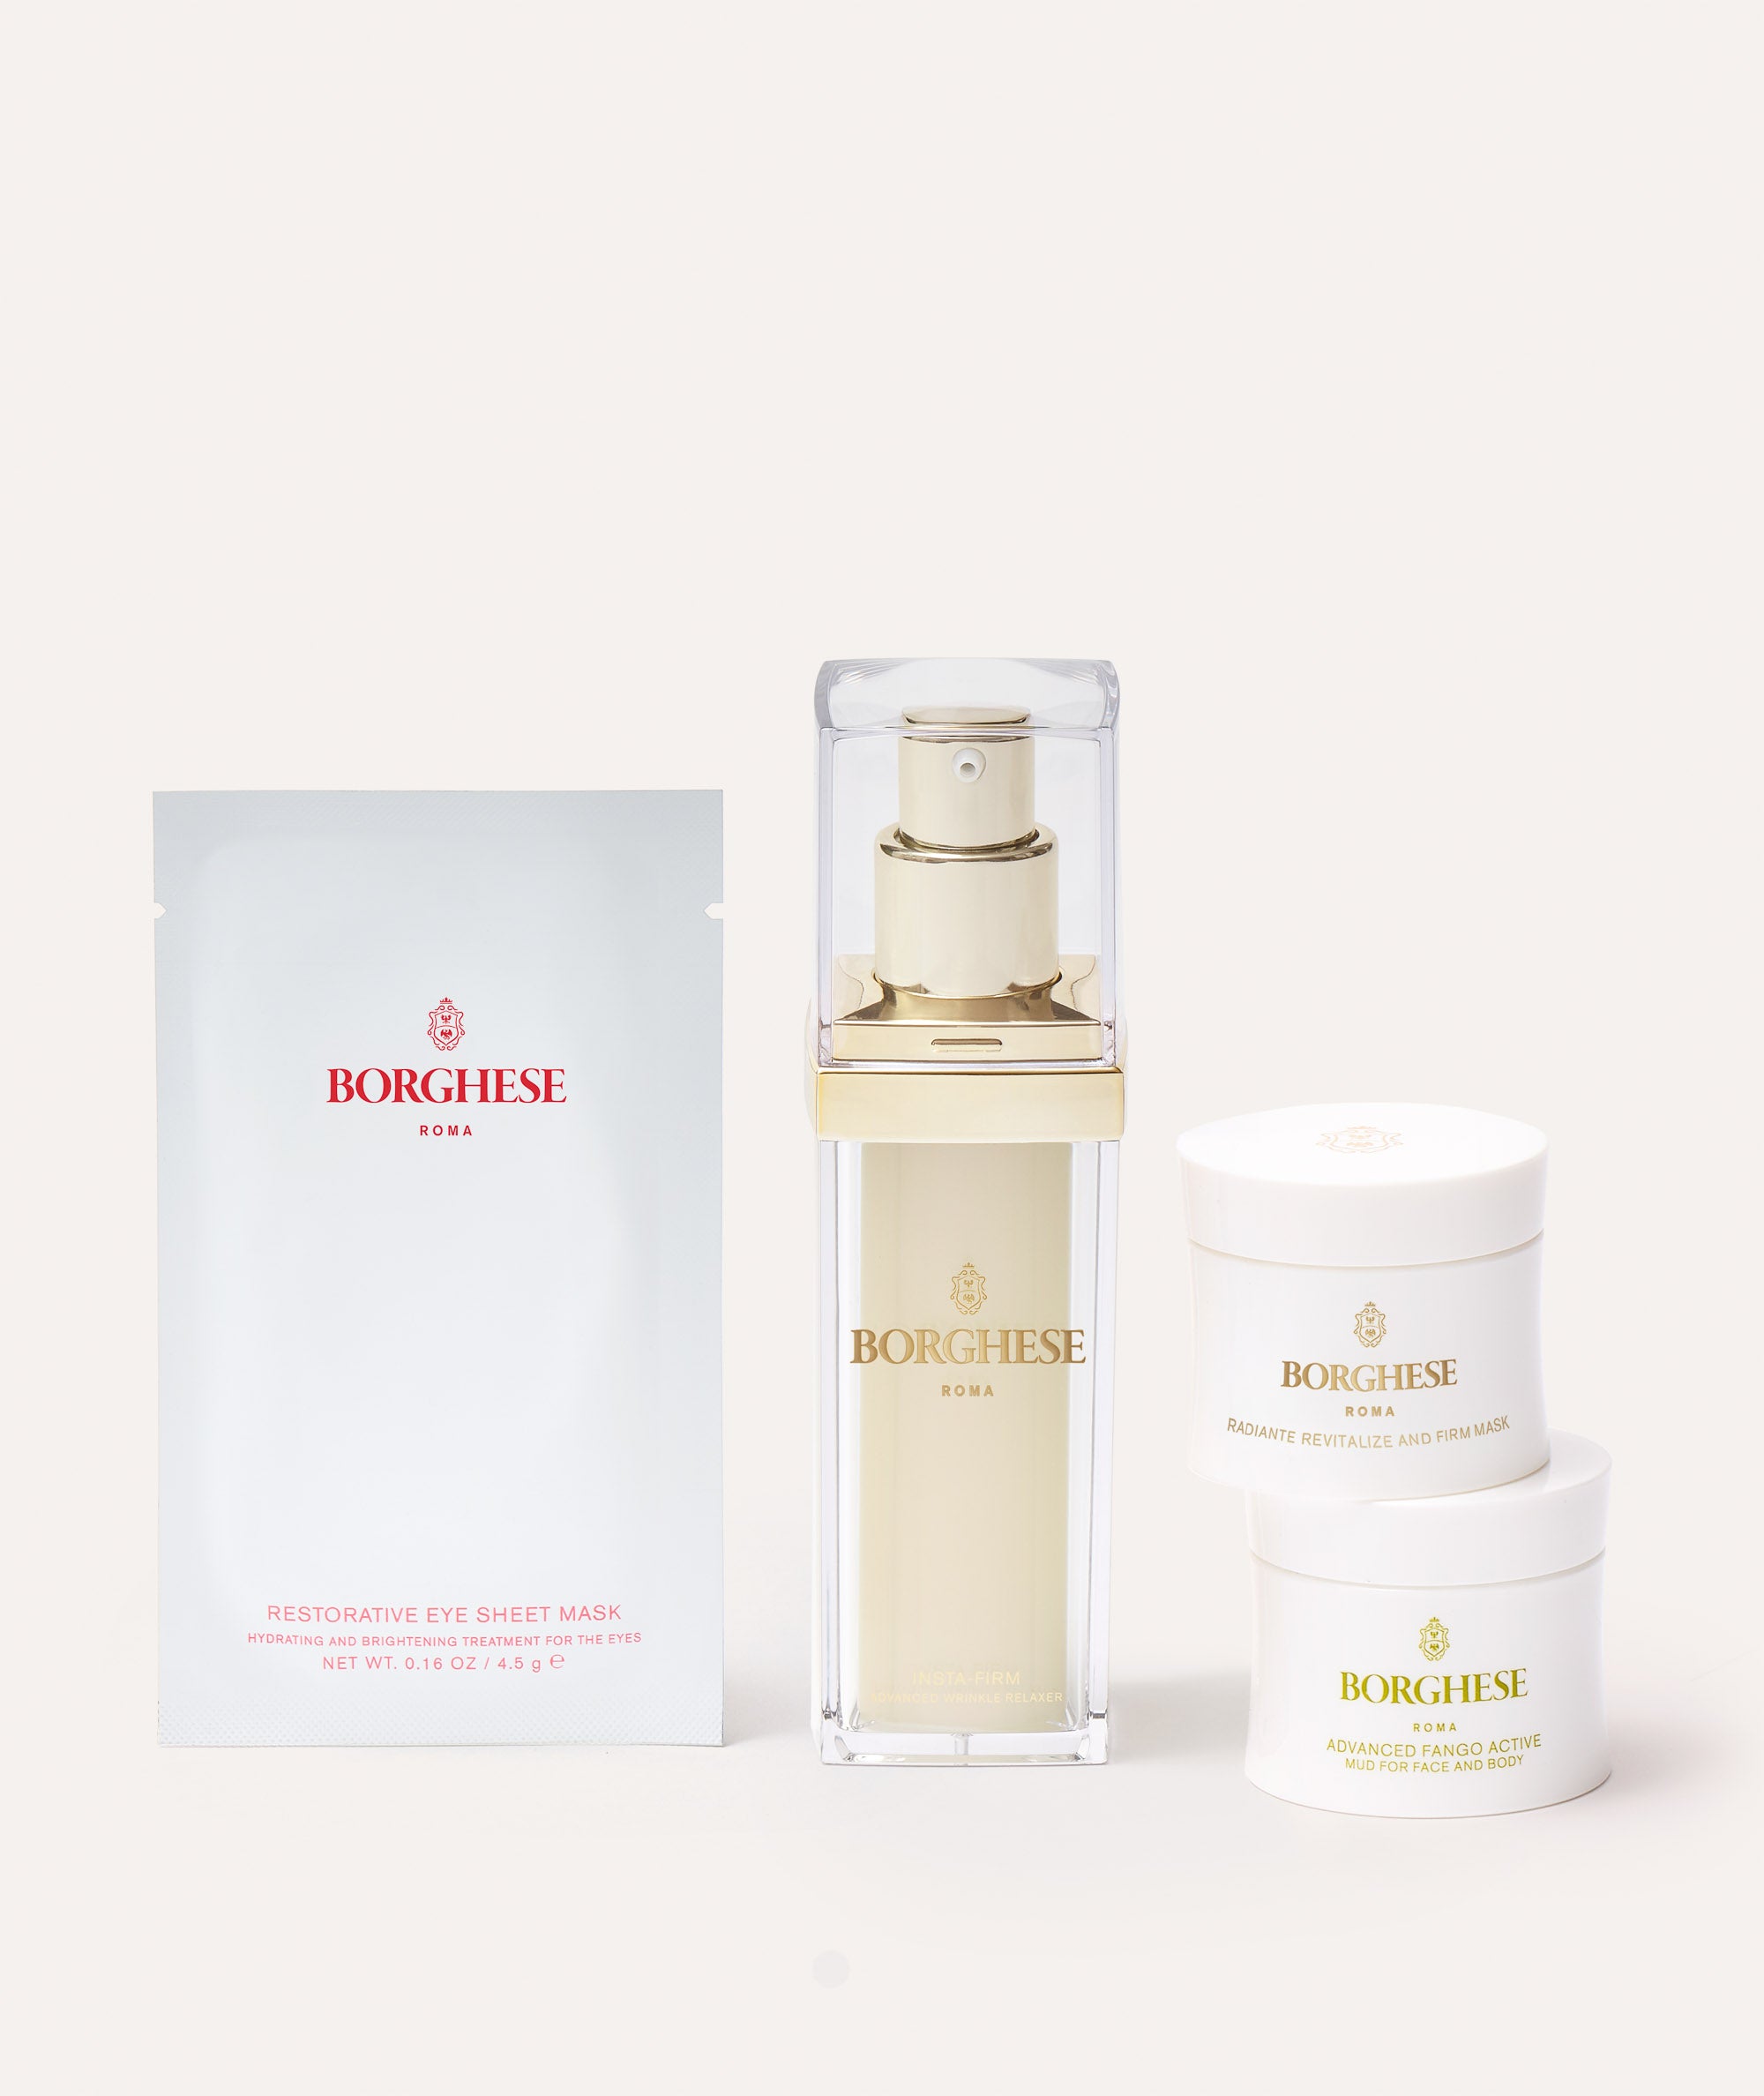 The Borghese 4-Piece Firming Results Gift Set contents